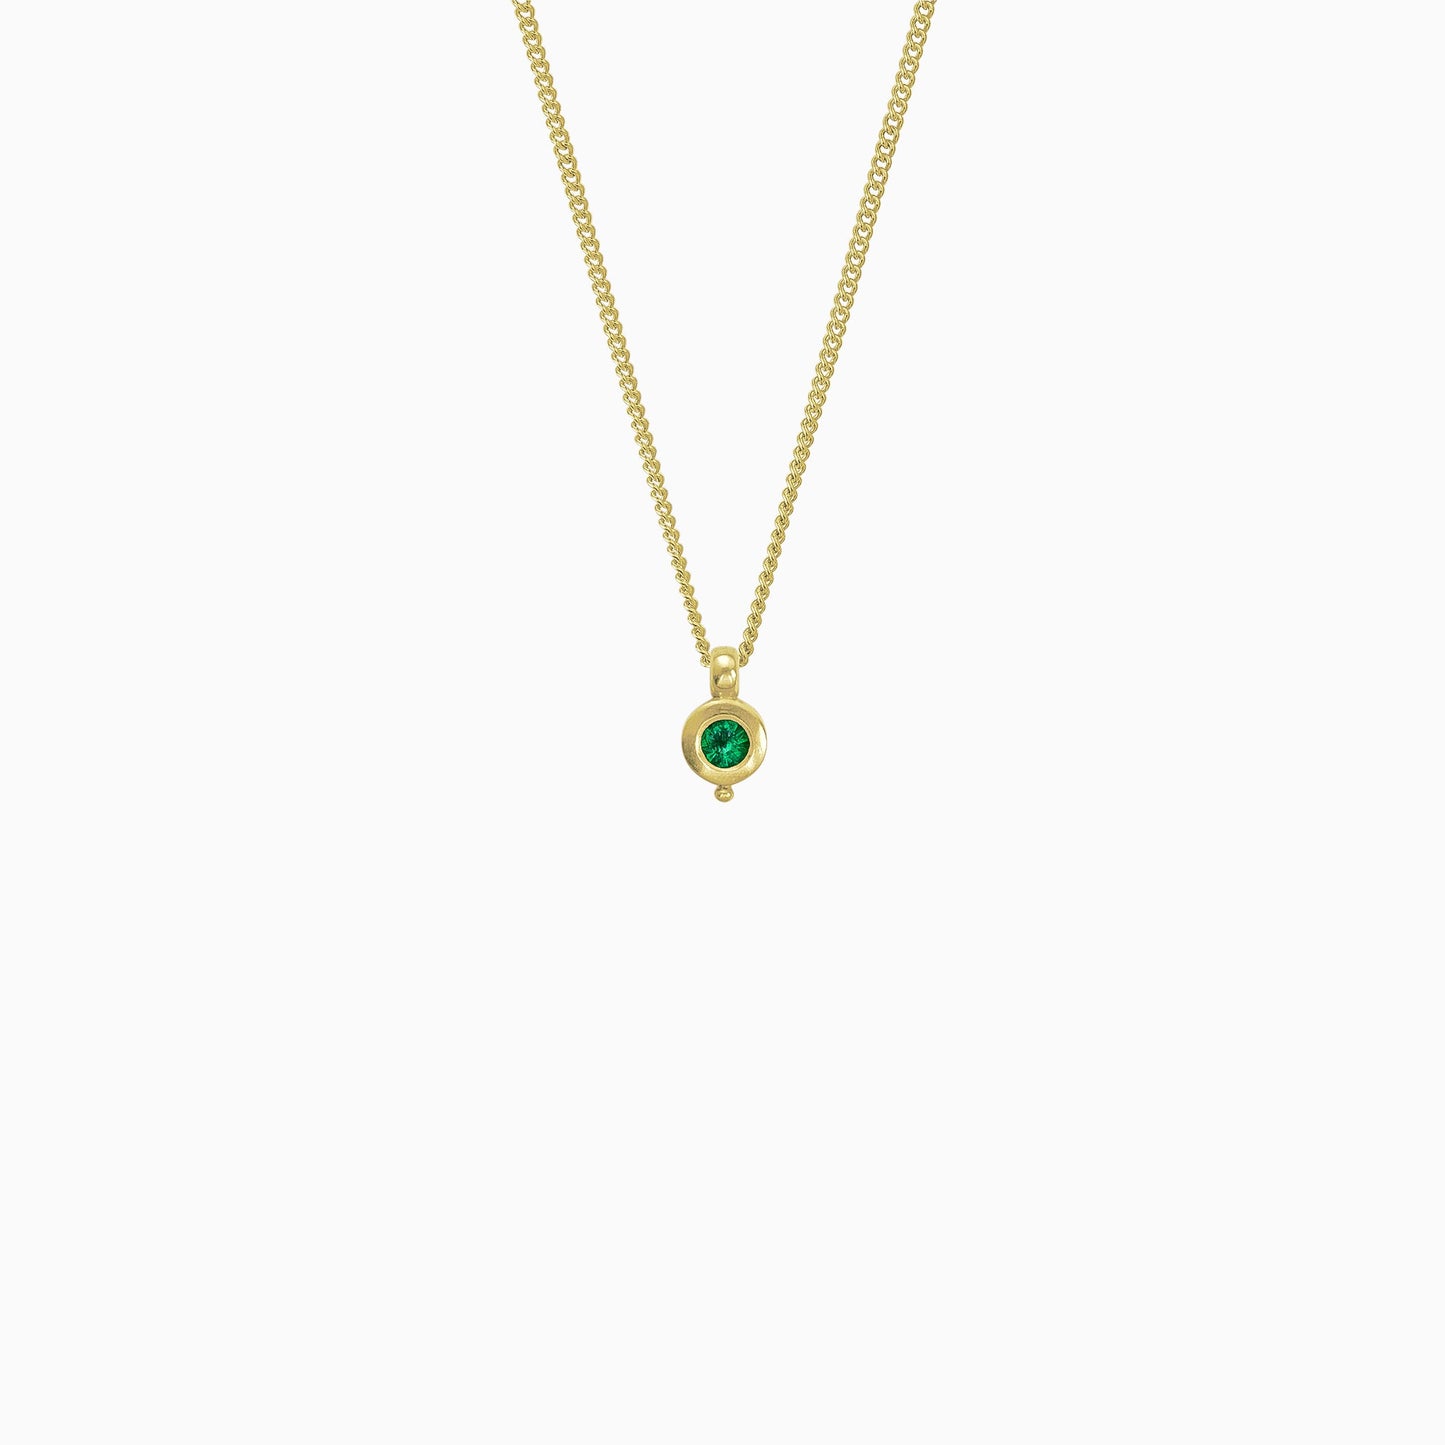 18ct Fairtrade yellow gold round pendant 12mm  x 7mm with small round bead attached below on a 45cm fine curb chain. Set with a 4mm round emerald.